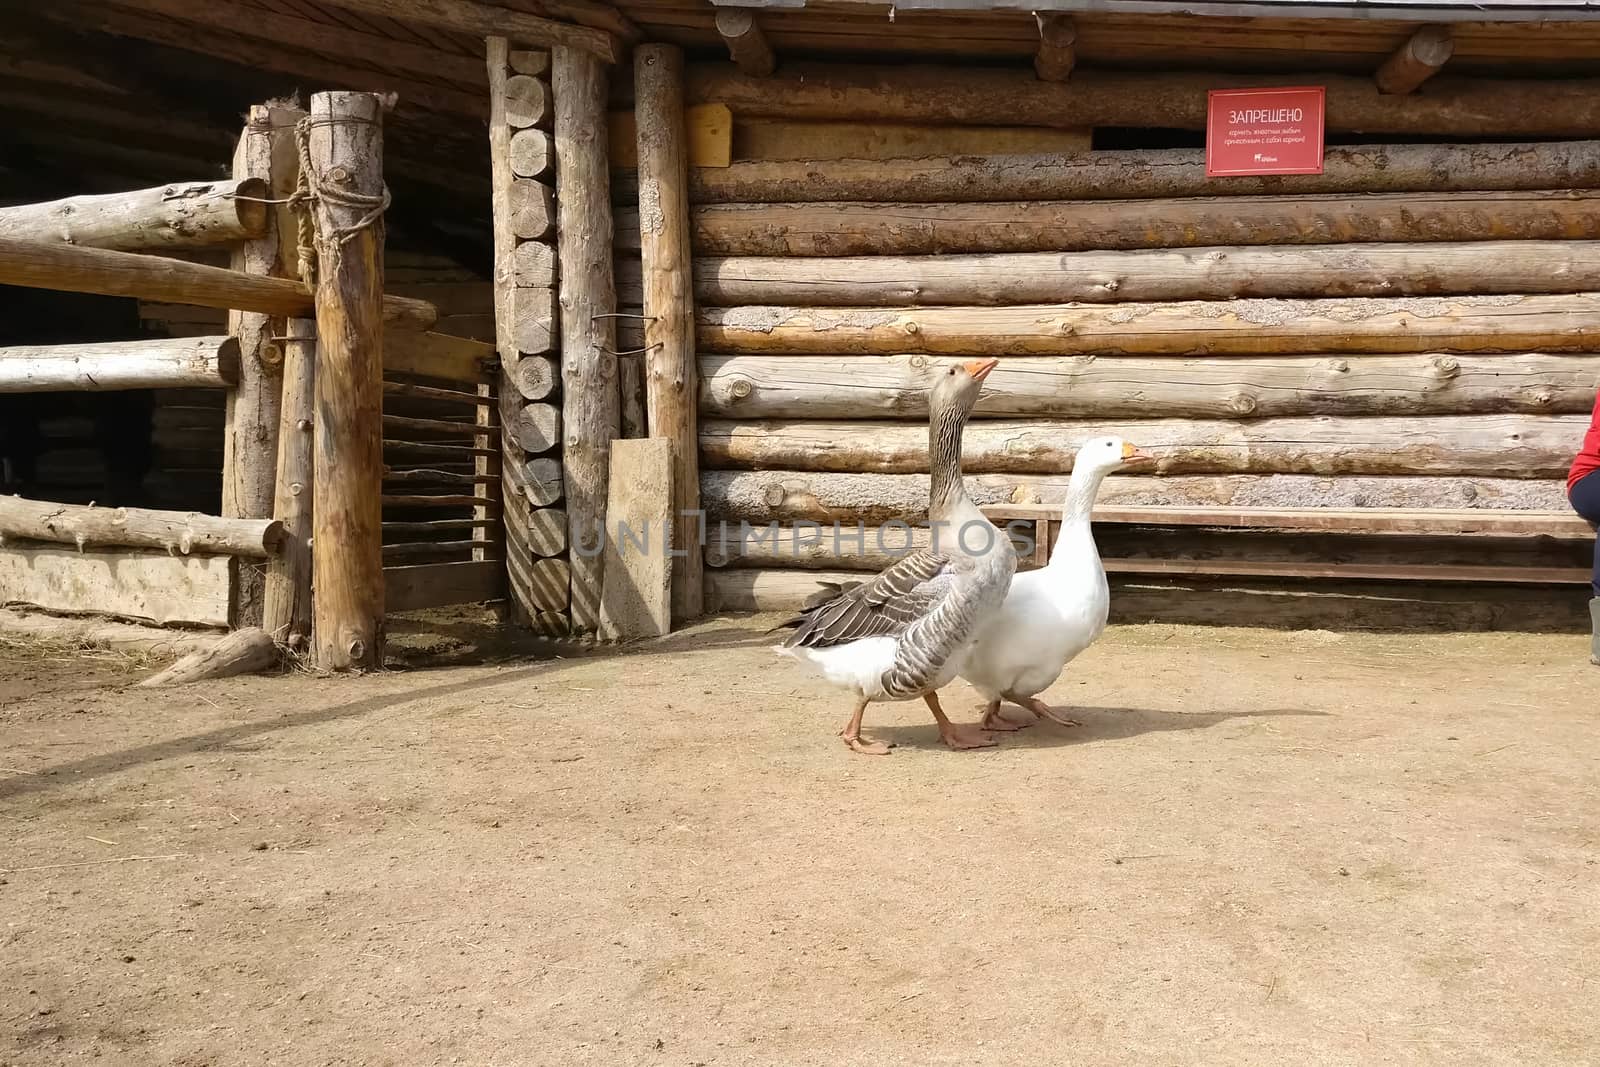 Two geese walk around the farmhouse. White and gray goose. by DePo